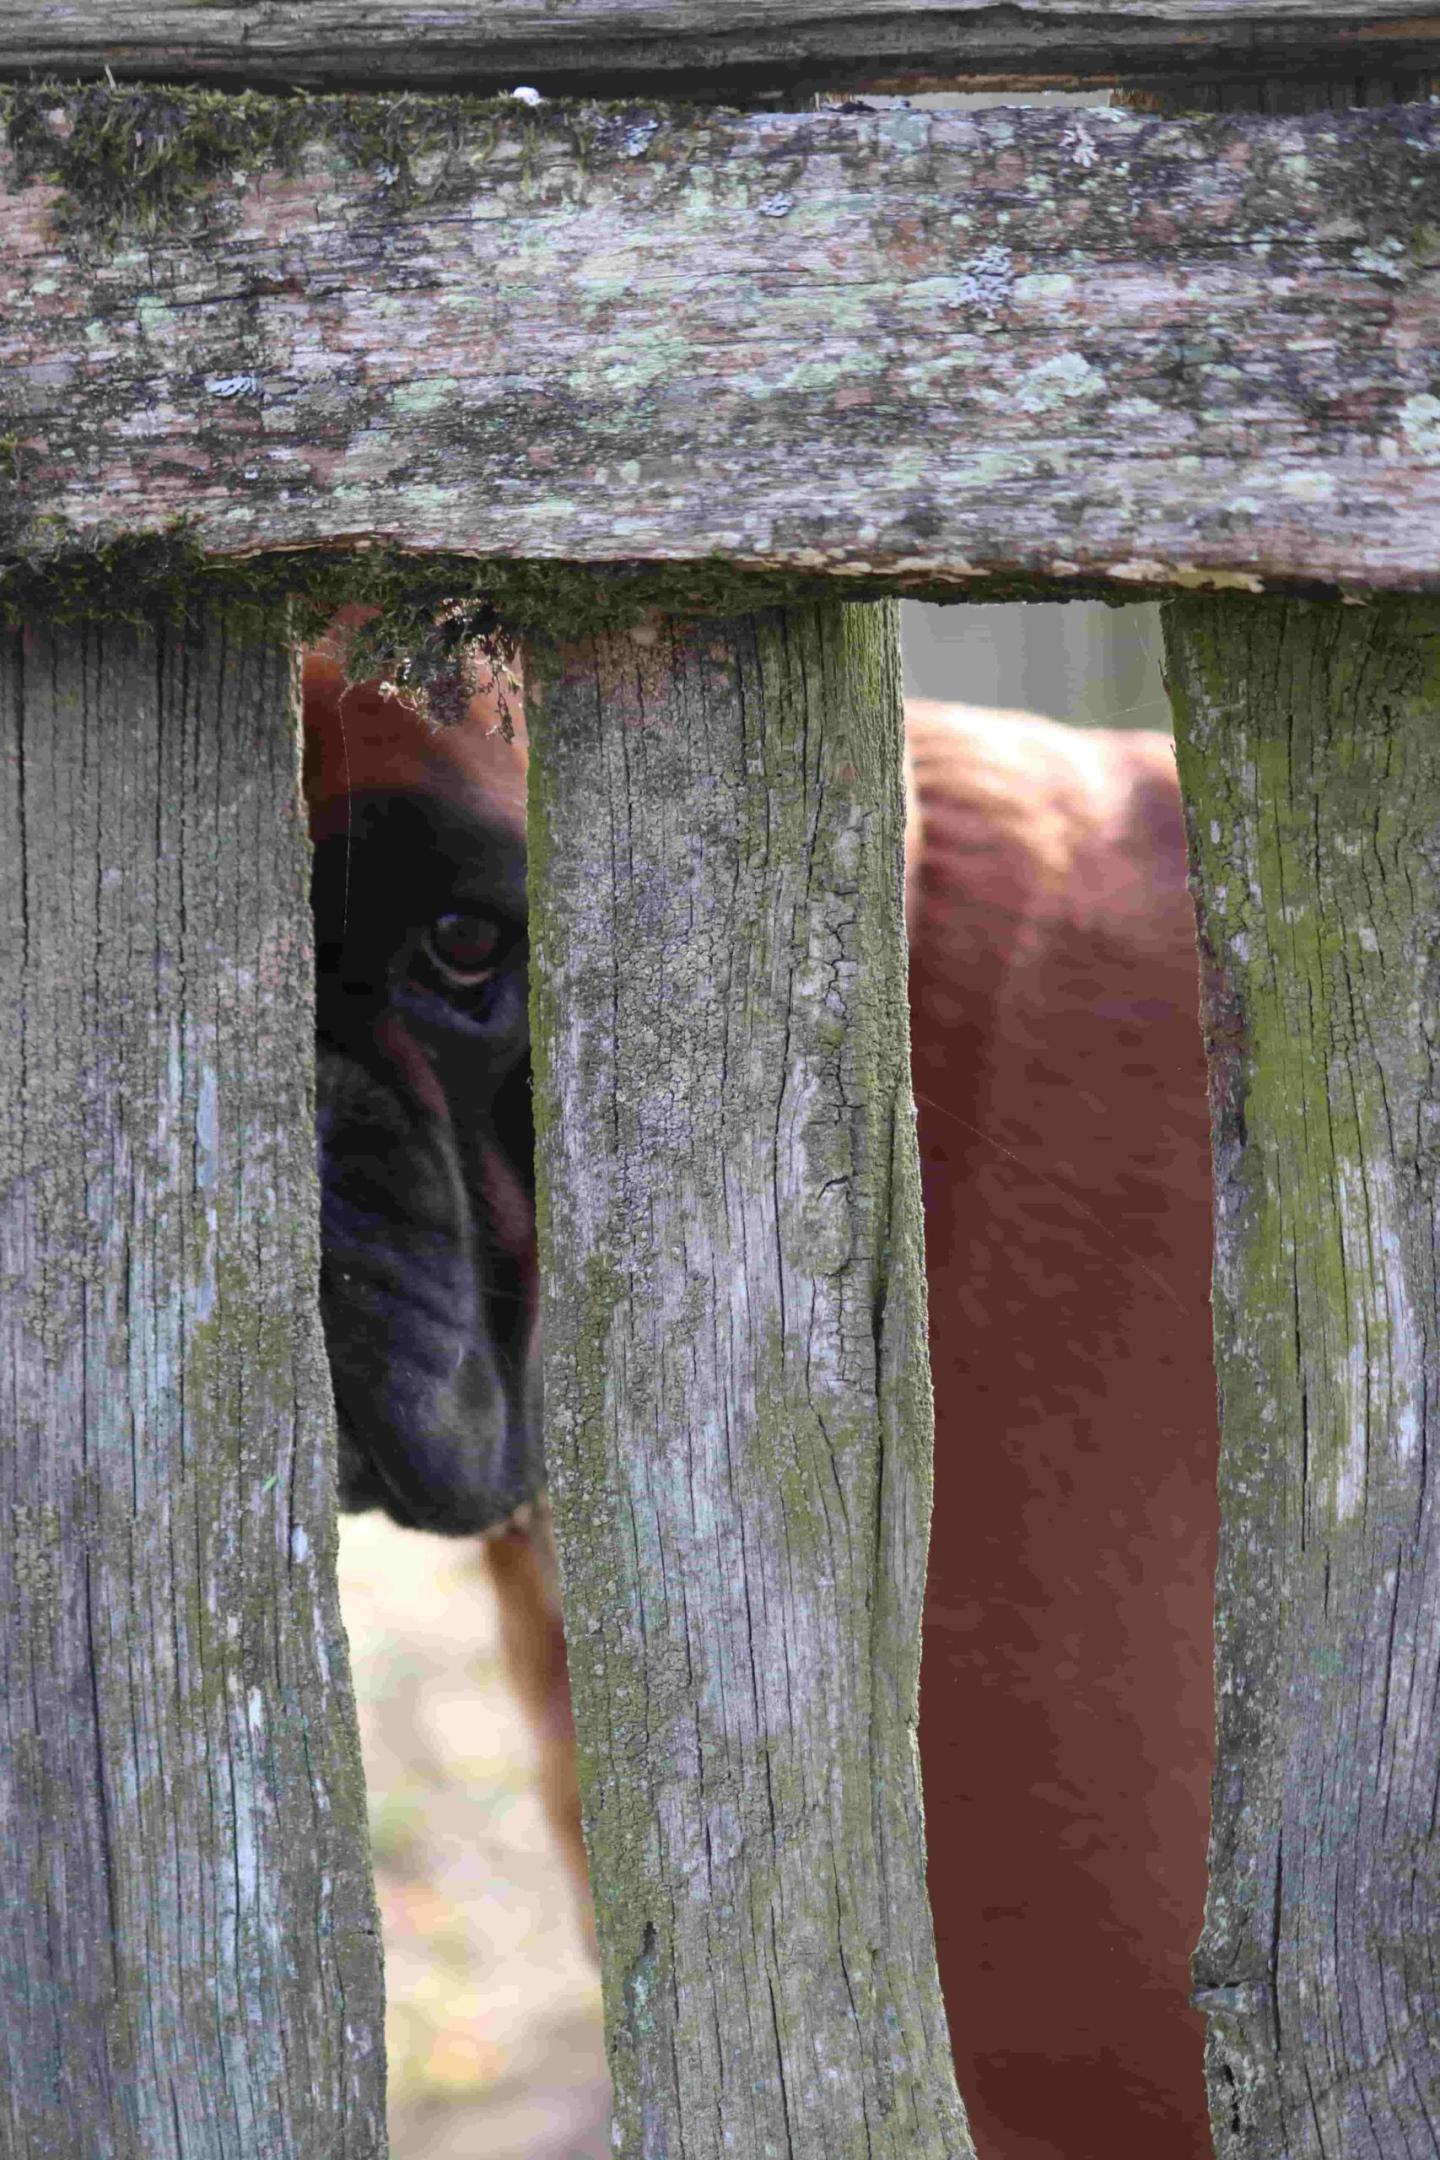 The dog looks through the wooden fence